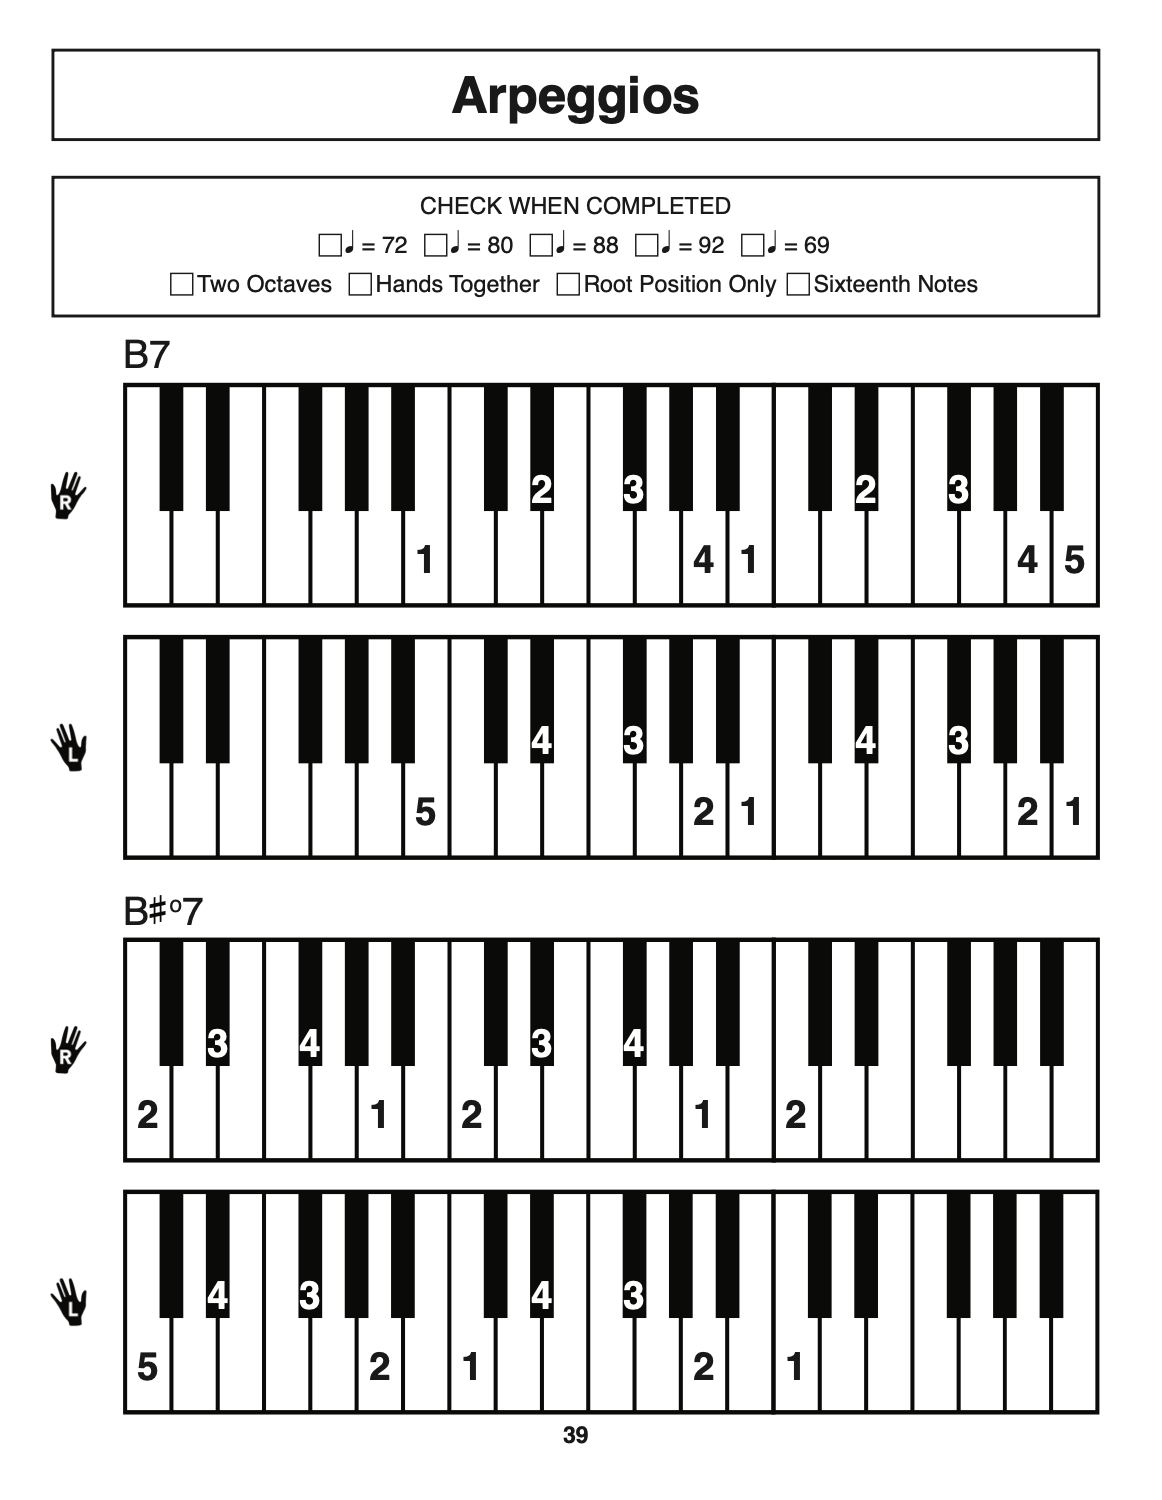 Arpeggios sample page from Easiest Technique Book Ever! 8